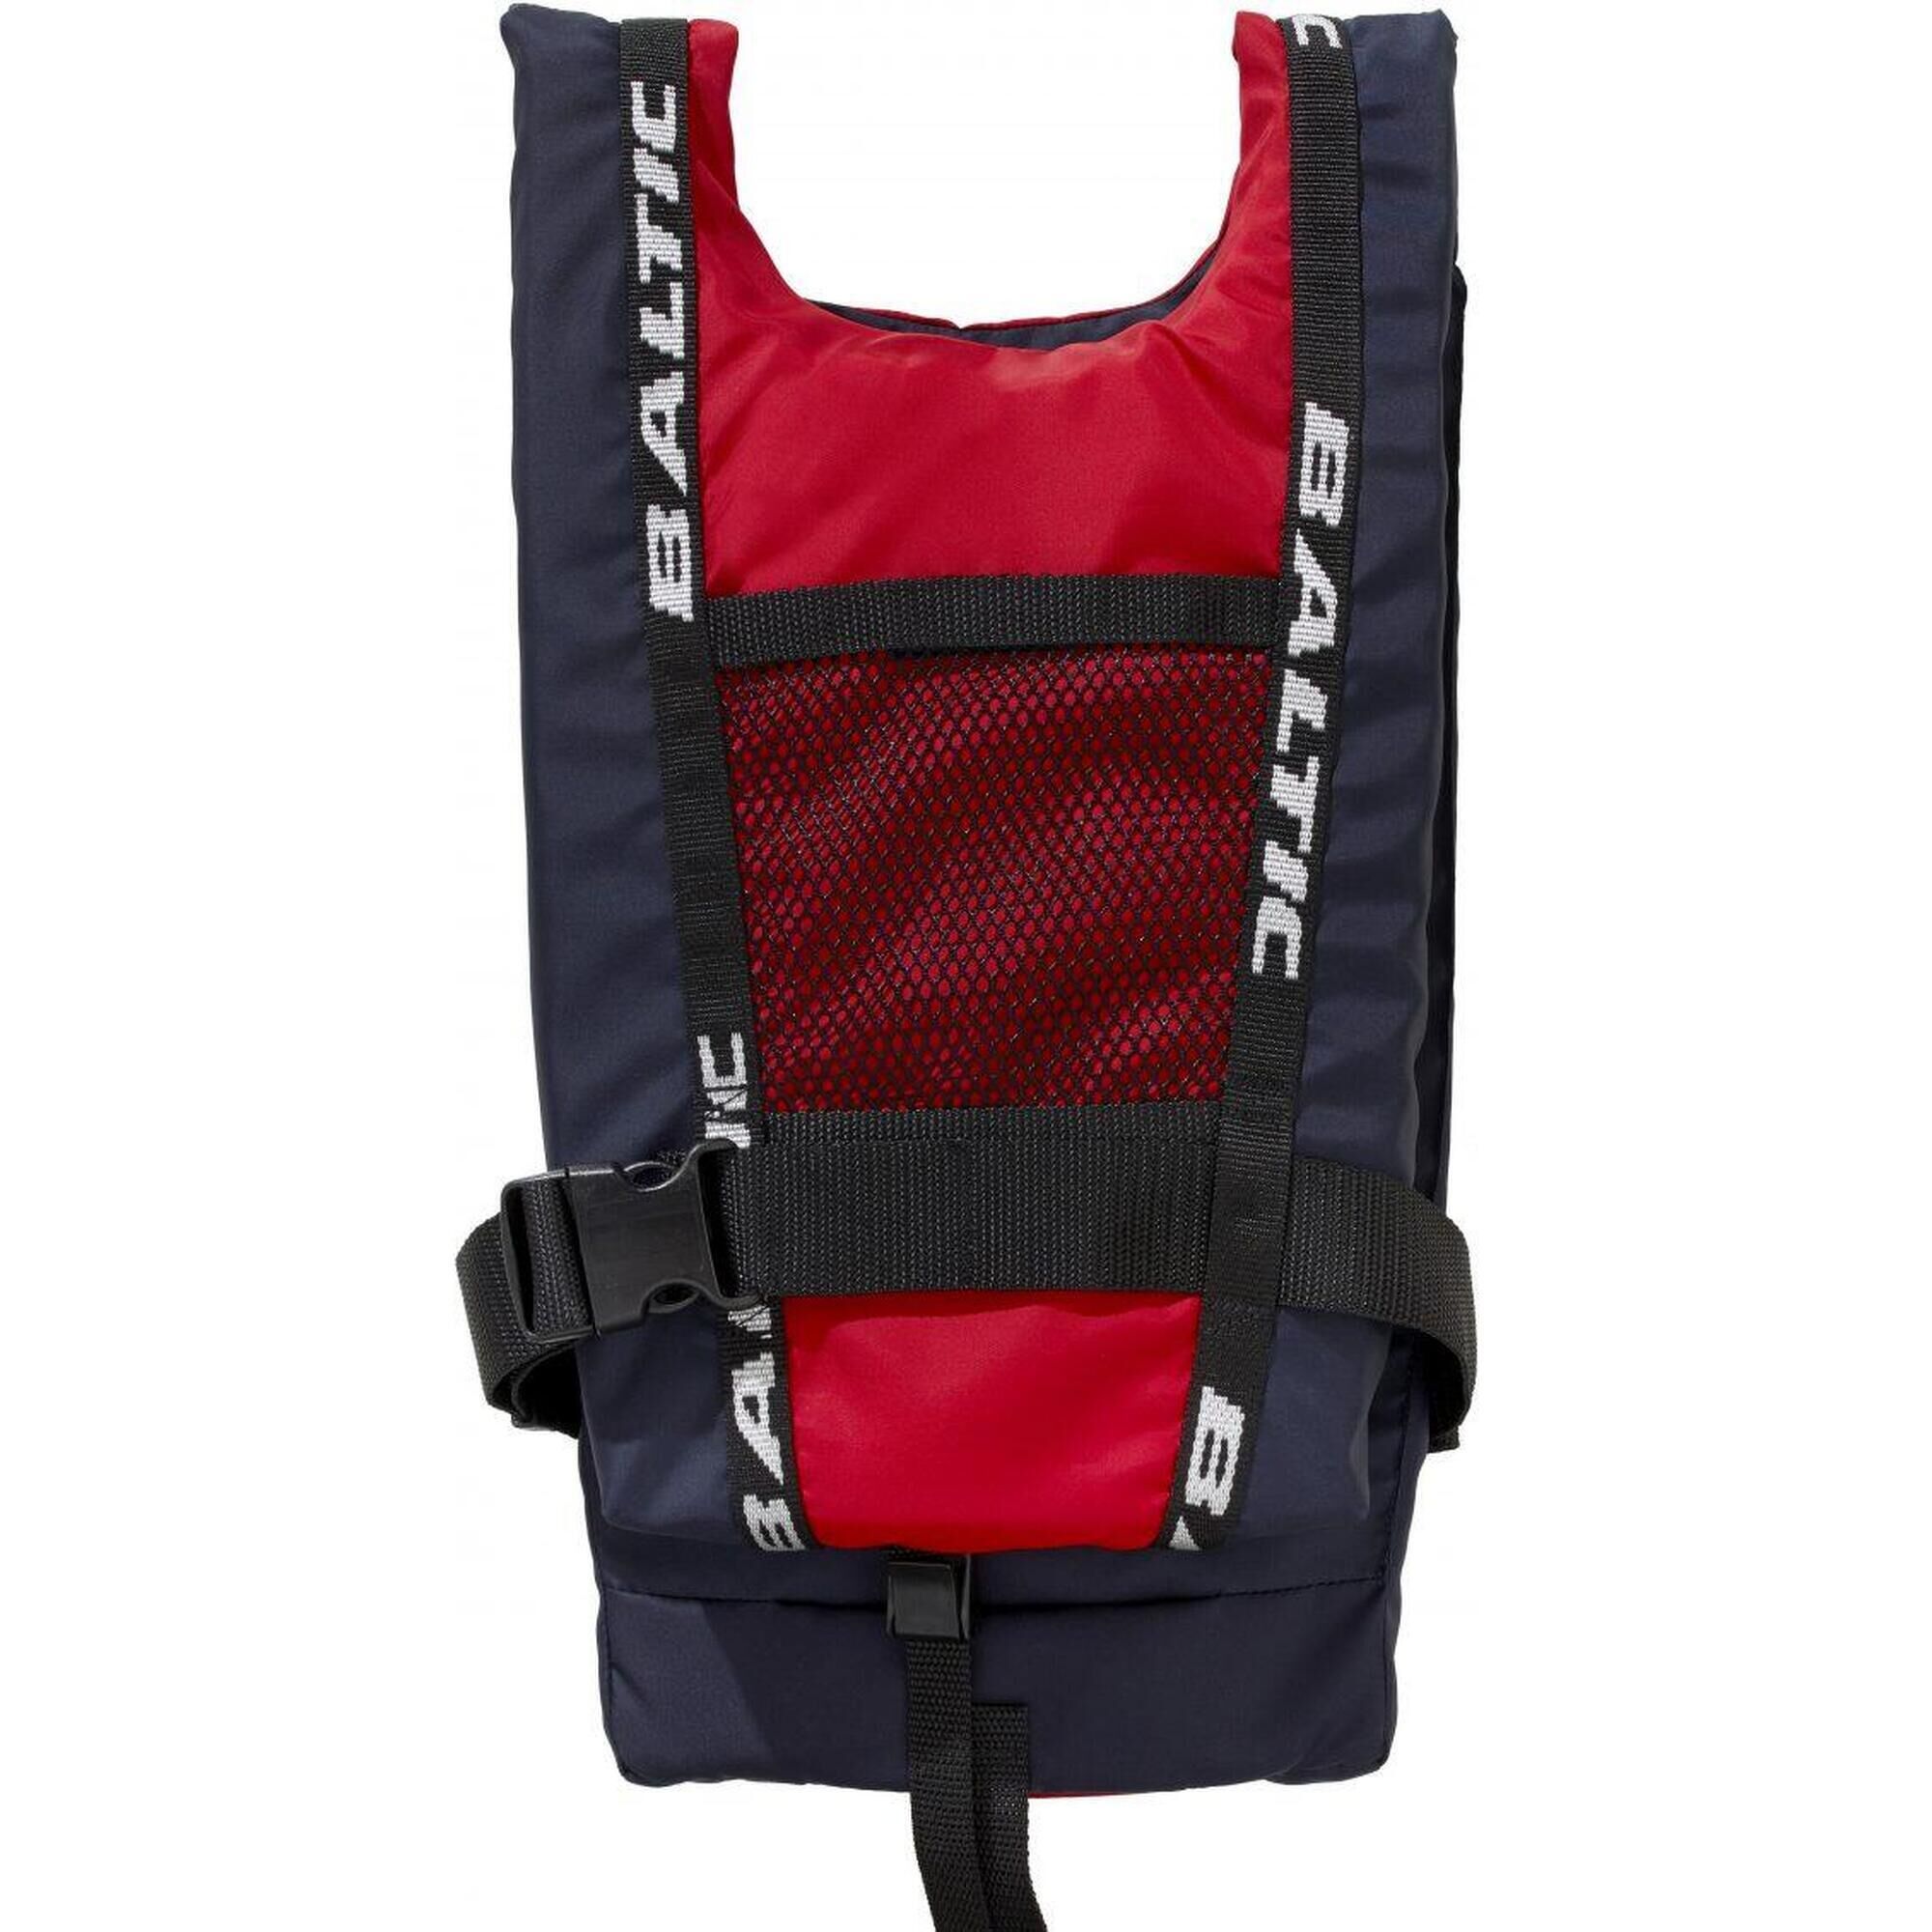 CAMBRIDGE KAYAKS Baltic Canoe Buoyancy Aid One Size Fits All Red/Navy